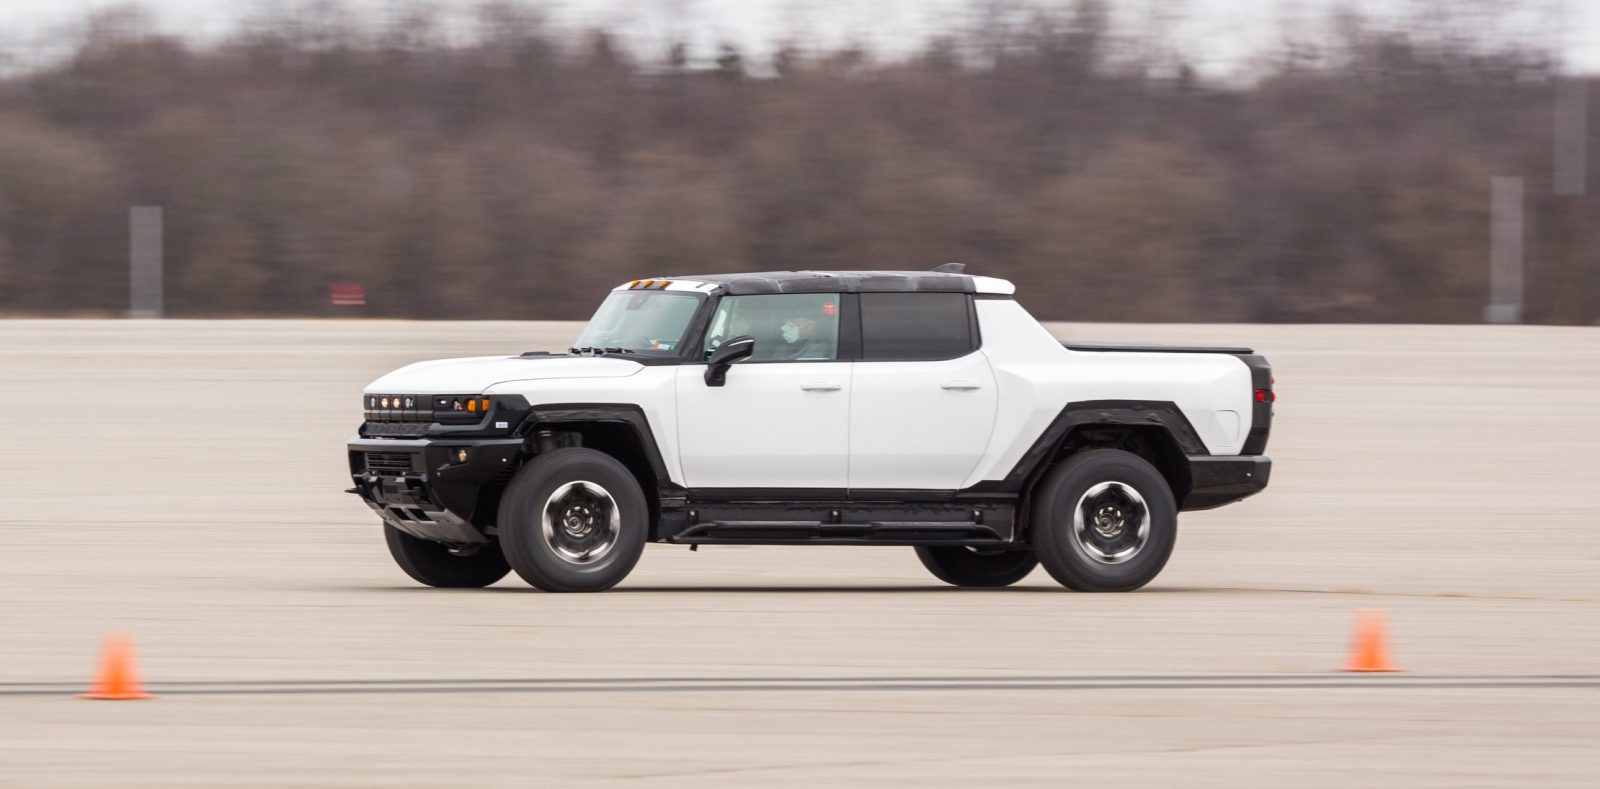 Gm Reveals Working Hummer Ev Pickup Prototype To Show The Doubters